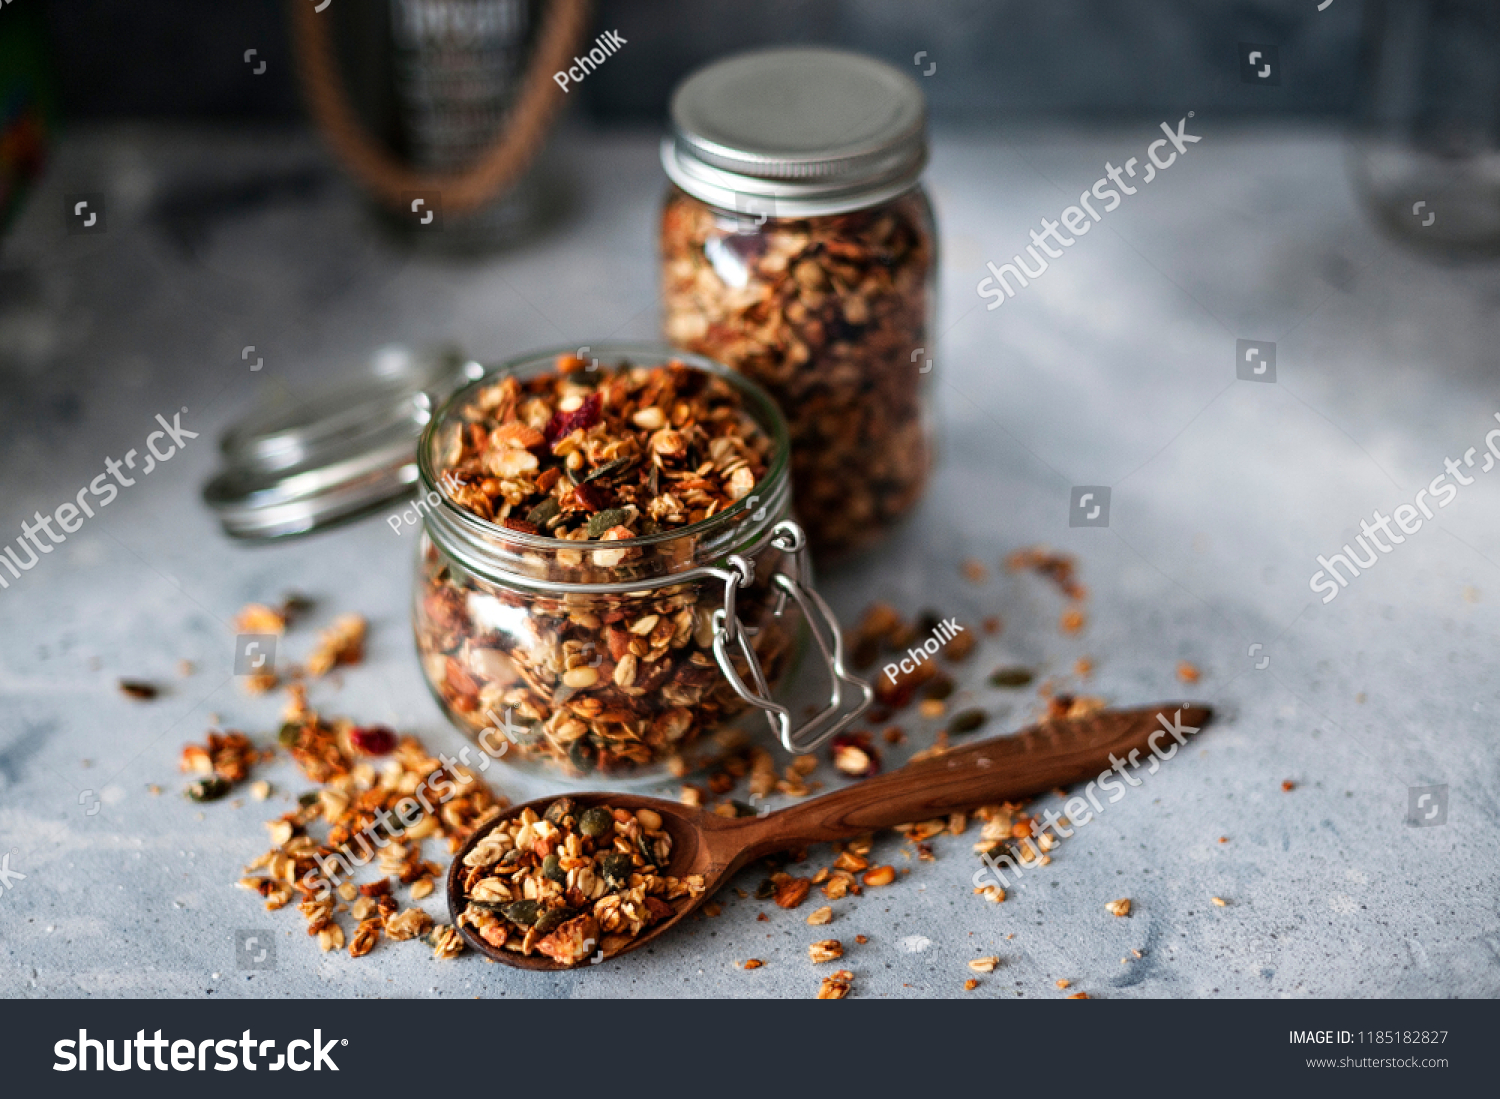 Home granola in a glass jar. Selective focus, concrete background.Healthy vegan snack #1185182827